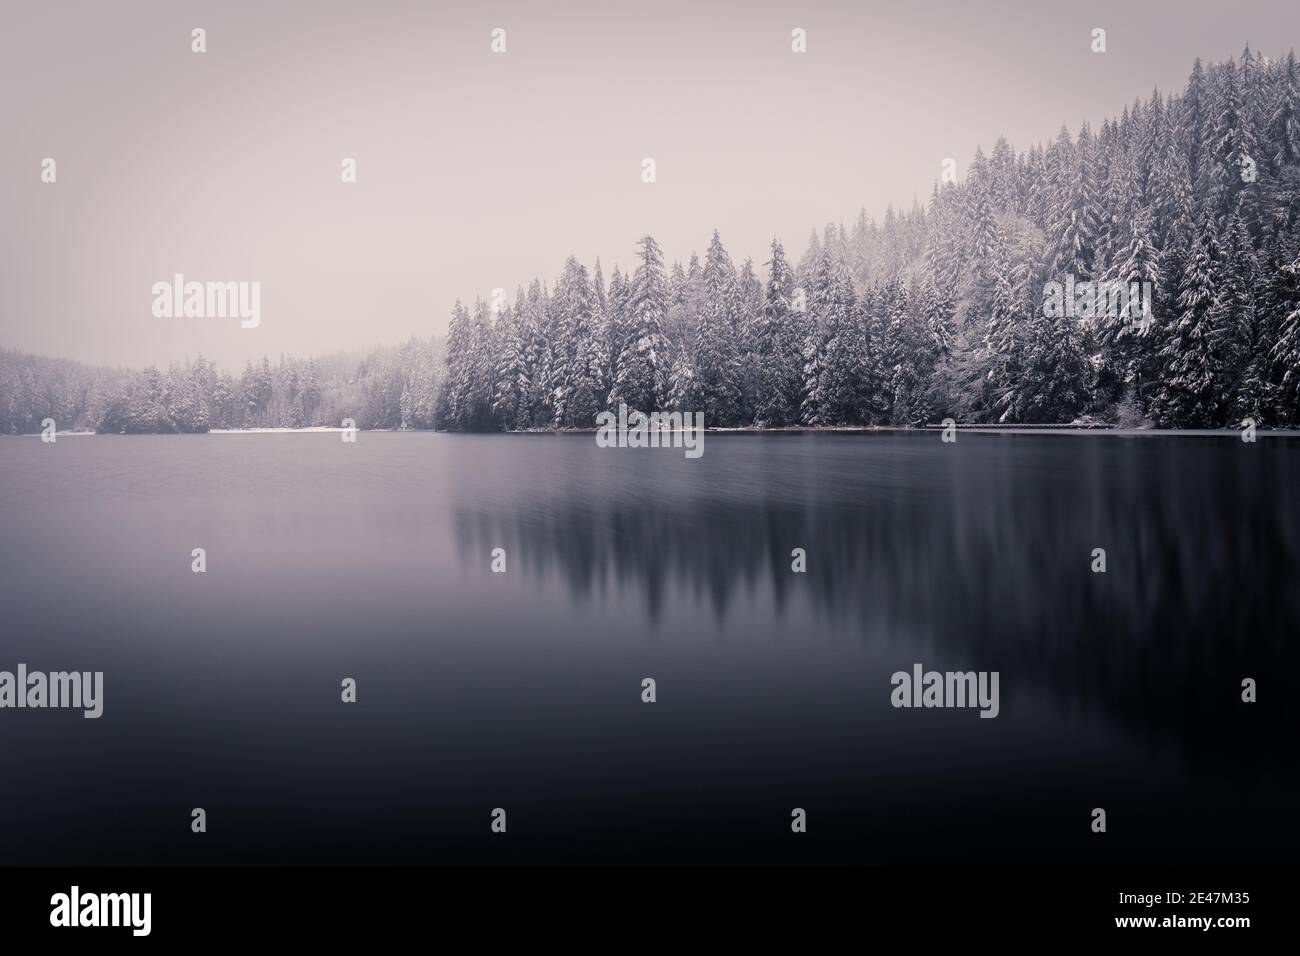 Frosty Lake in Winter. Reflection of Snowy Trees. Long Exposure Water Movement. Overcast & Foggy. Sasamat Lake, Port Moody, British Columbia, Canada. Stock Photo